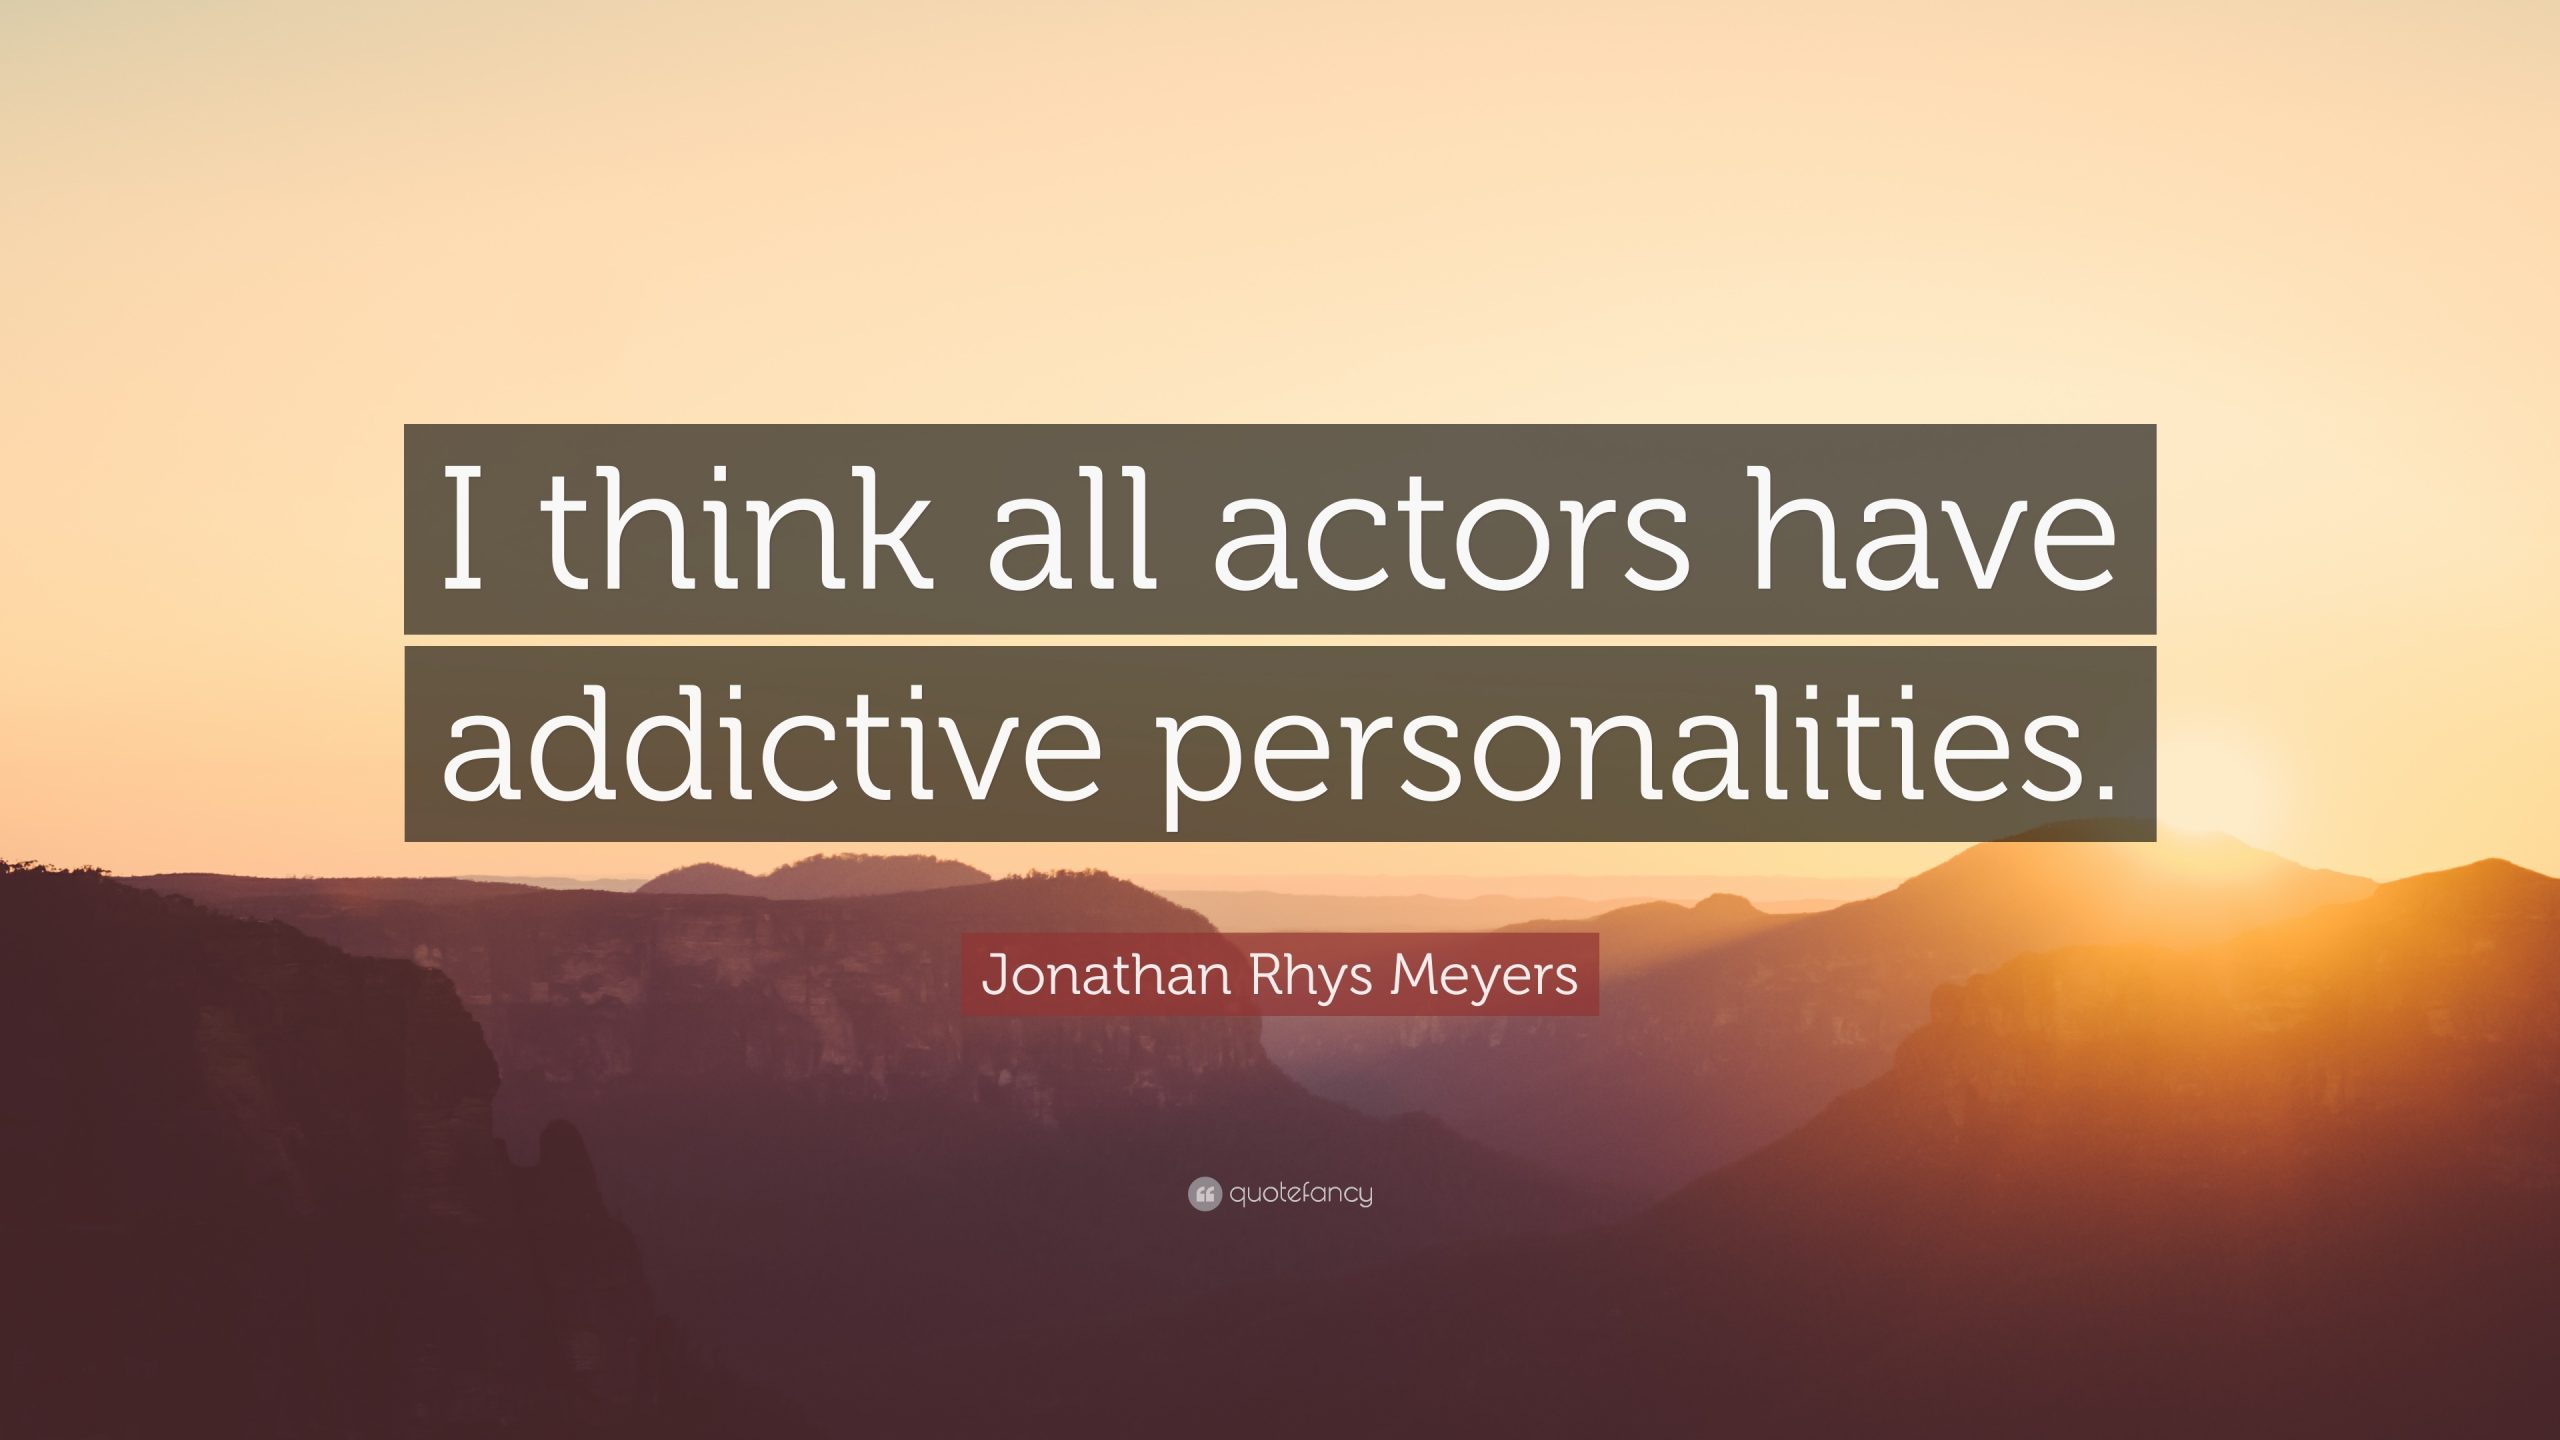 Jonathan Rhys Meyers Quote: I think all actors have addictive ...